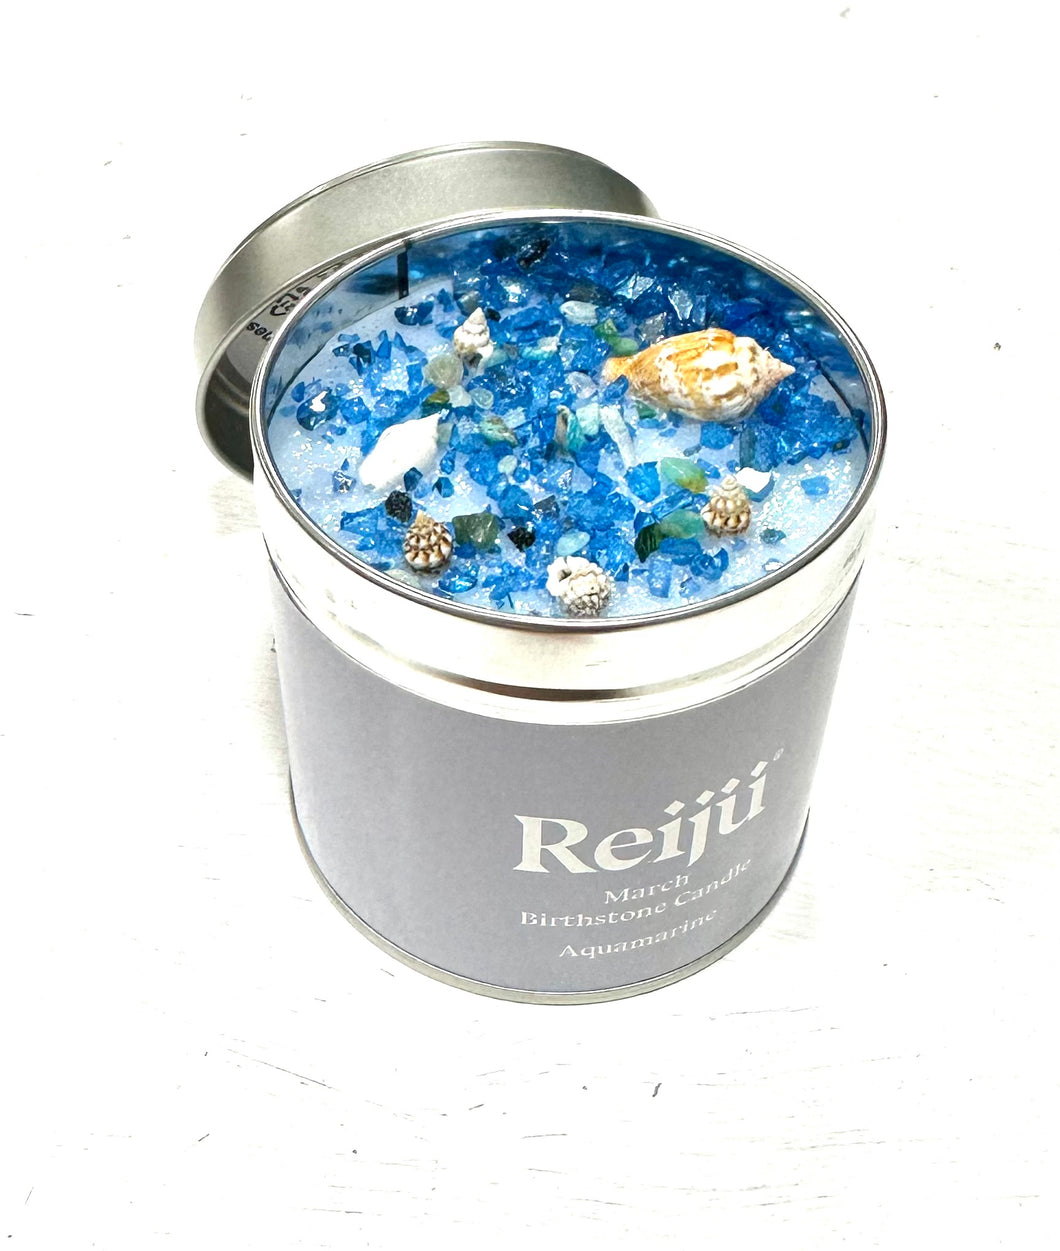 March Birthstone Aquamarine Crystal Topped Blue Luxury Candle Fragranced with Patchouli, Ginger, Clove & Seaweed